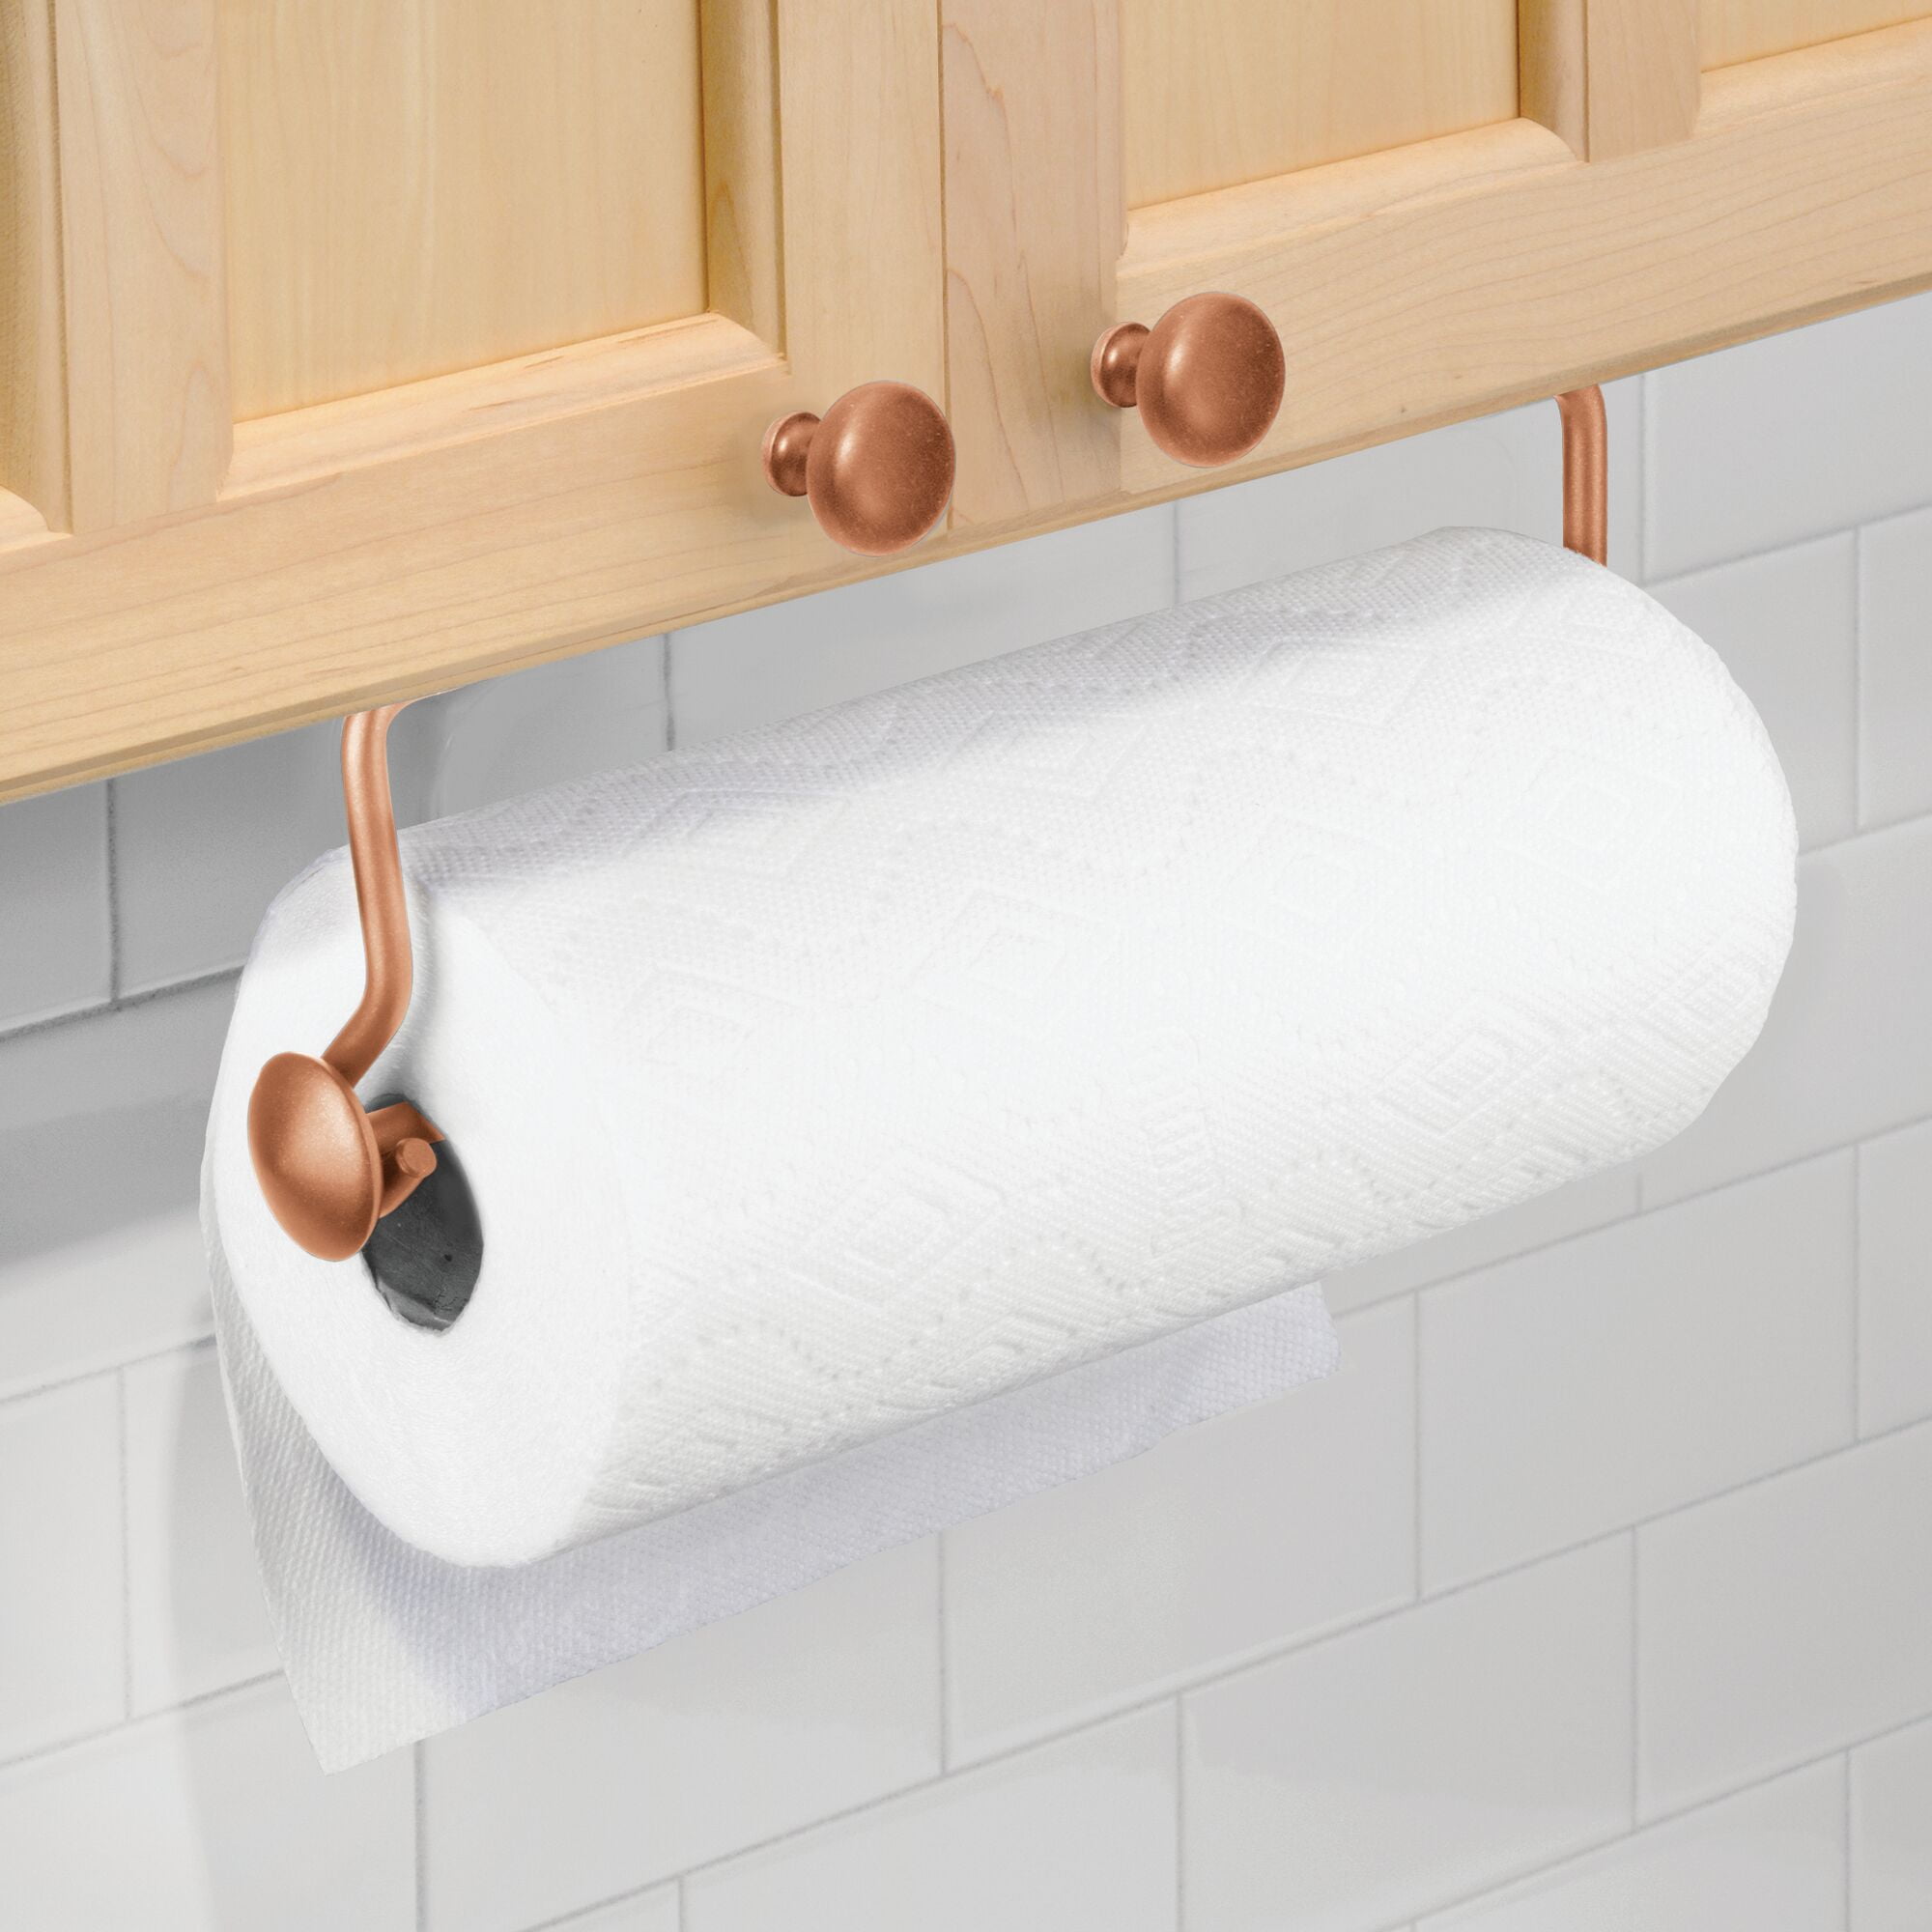 Dropship 2 Pack Wall Mounted Paper Towel Holder Under Cabinet